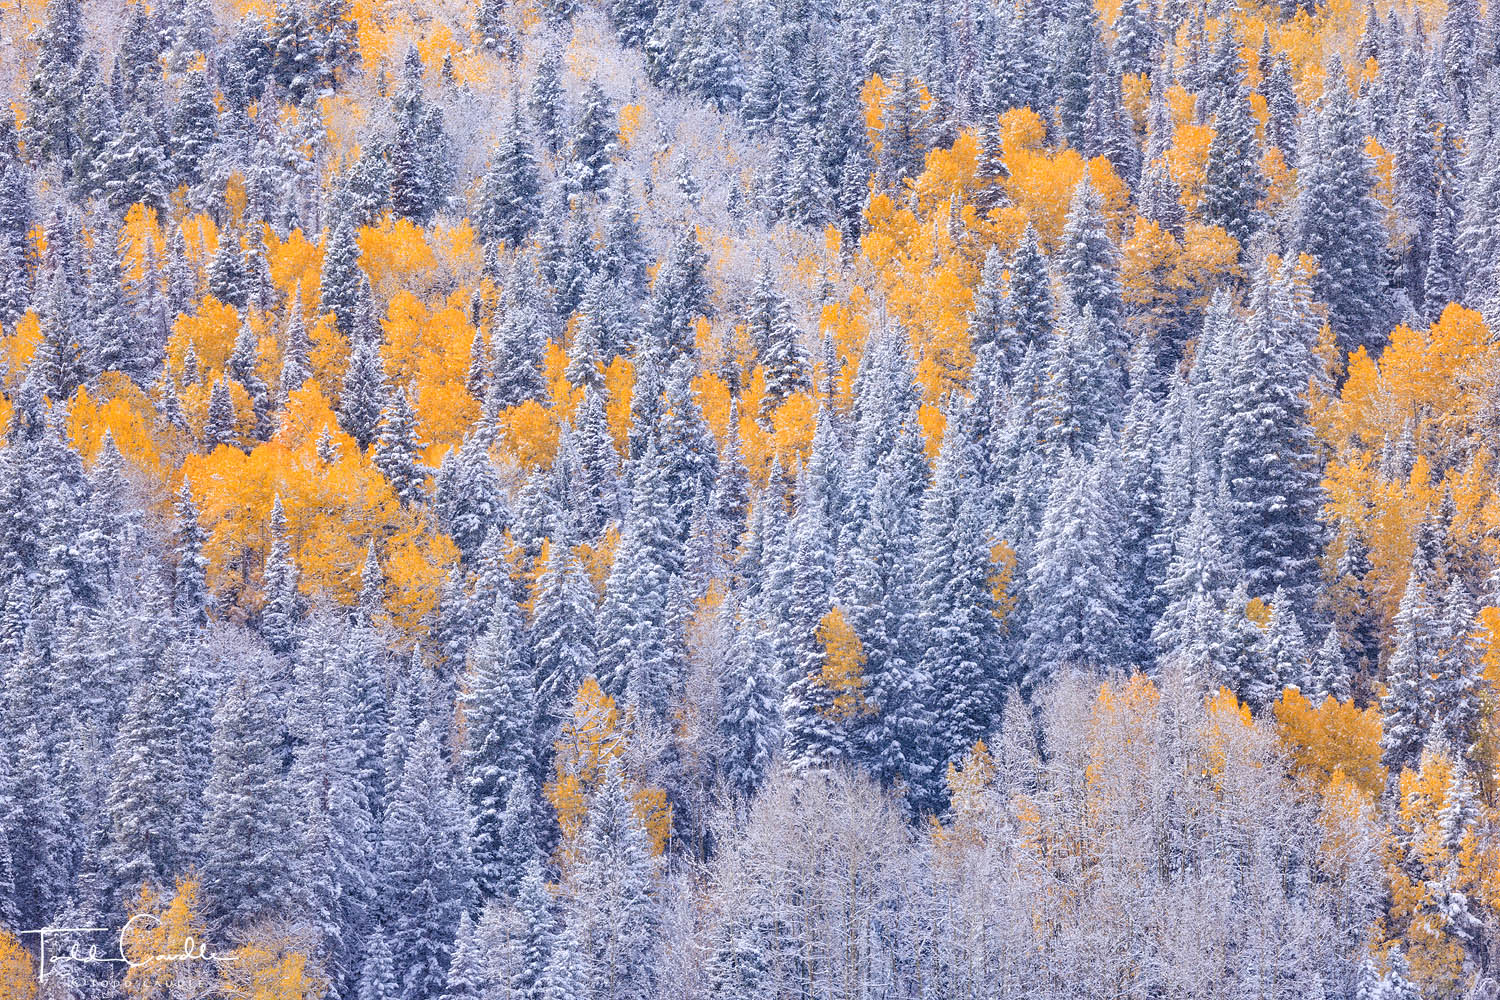 A mix of aspens and pines weather the season's first substantial snowstorm near Crested Butte.